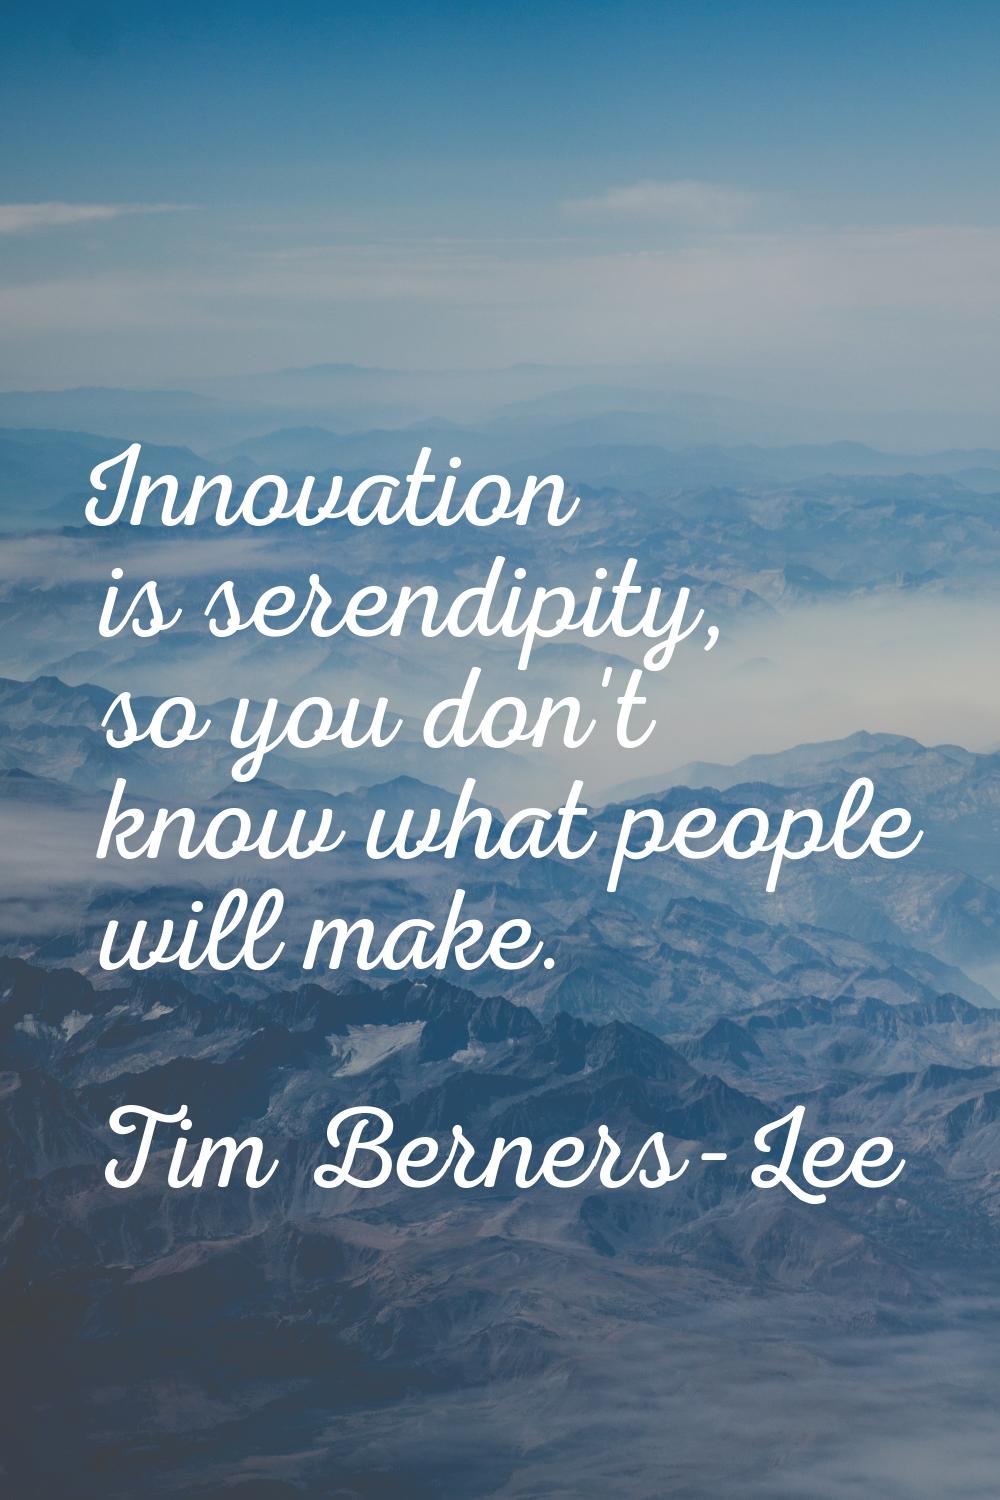 Innovation is serendipity, so you don't know what people will make.